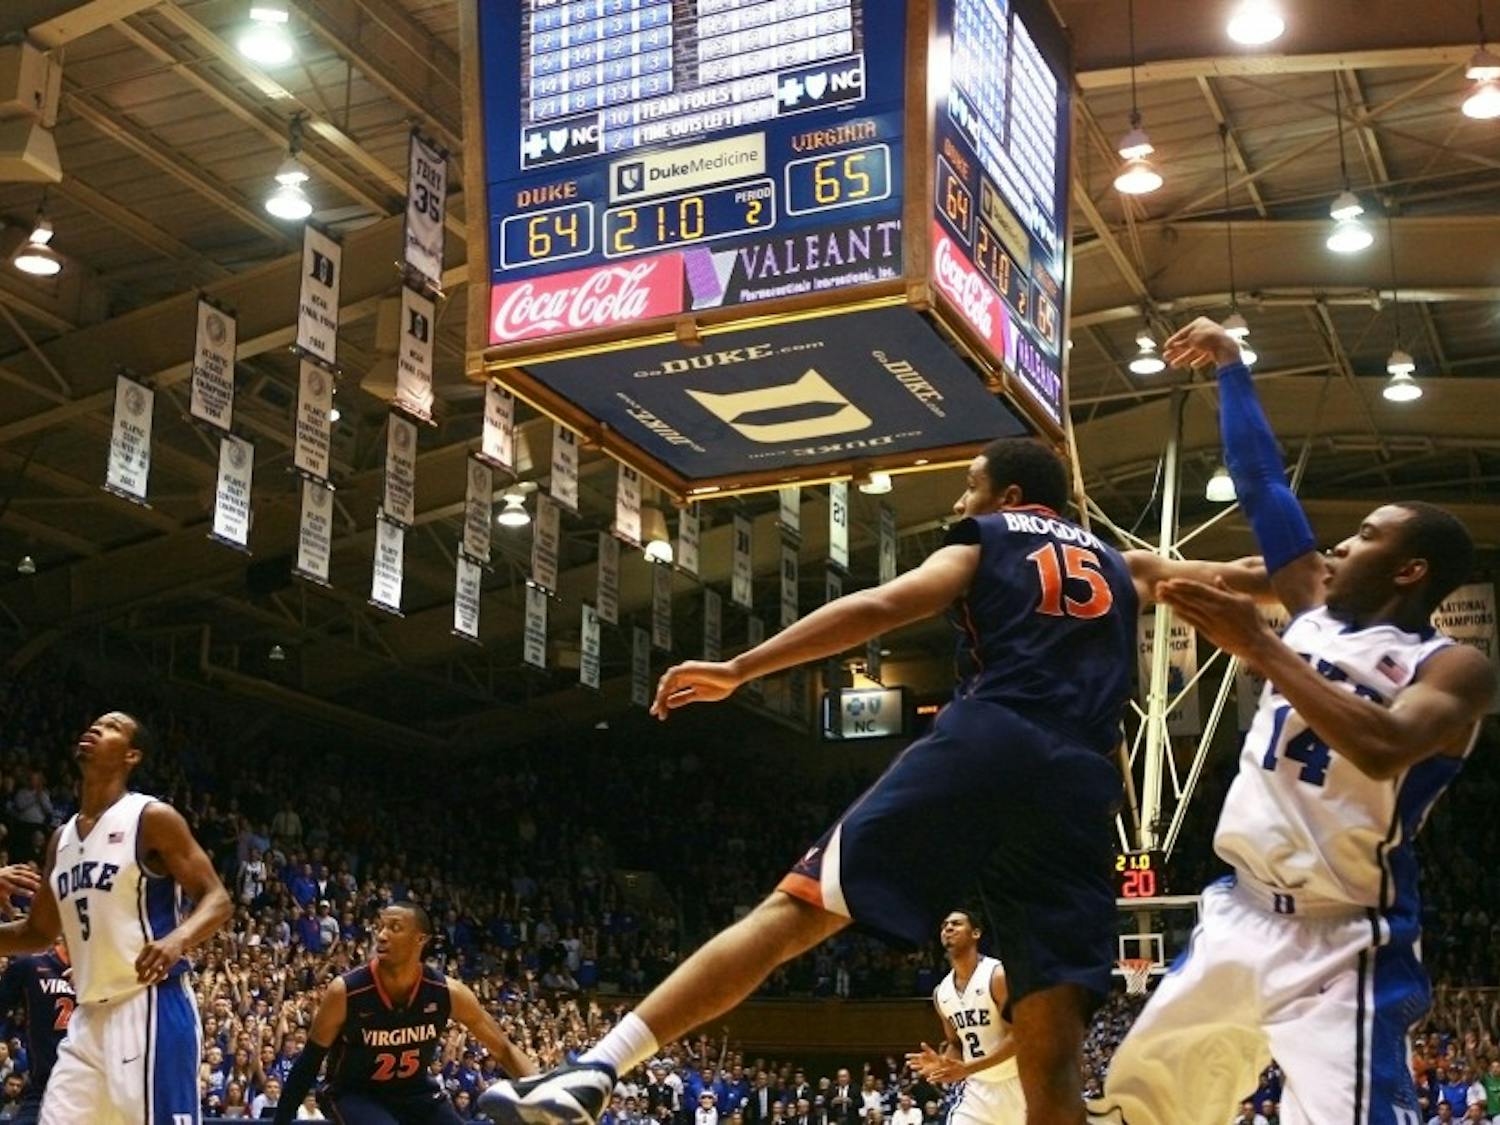 Rasheed Sulaimon’s 3-pointer in the closing seconds got a shooter’s roll and propelled Duke to a 69-65 victory against Virginia.